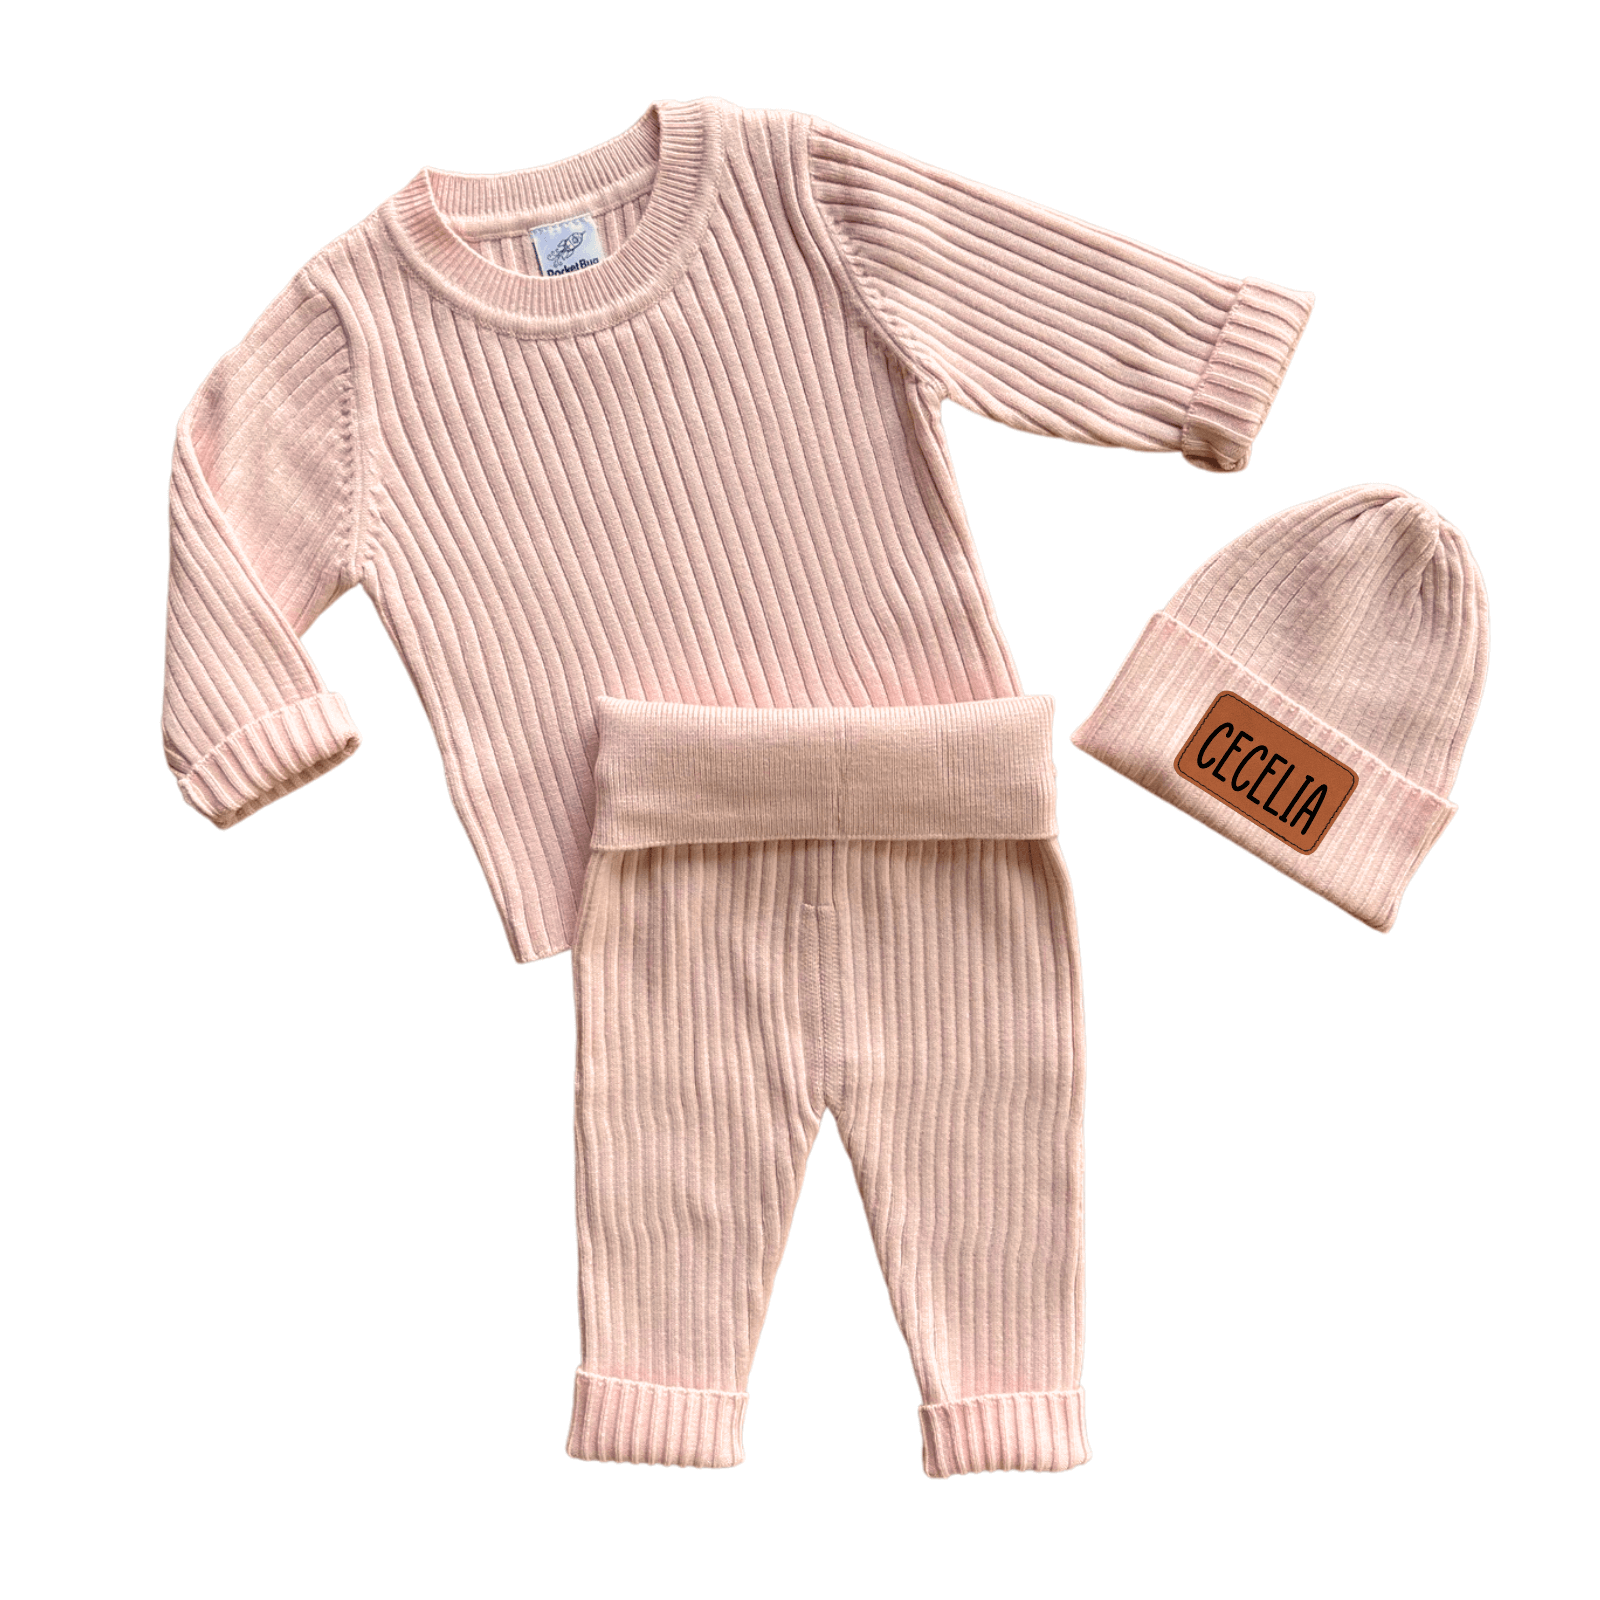 Soft Knit Baby Set with Personalized "Leather" Patch - undefined - Rocket Bug